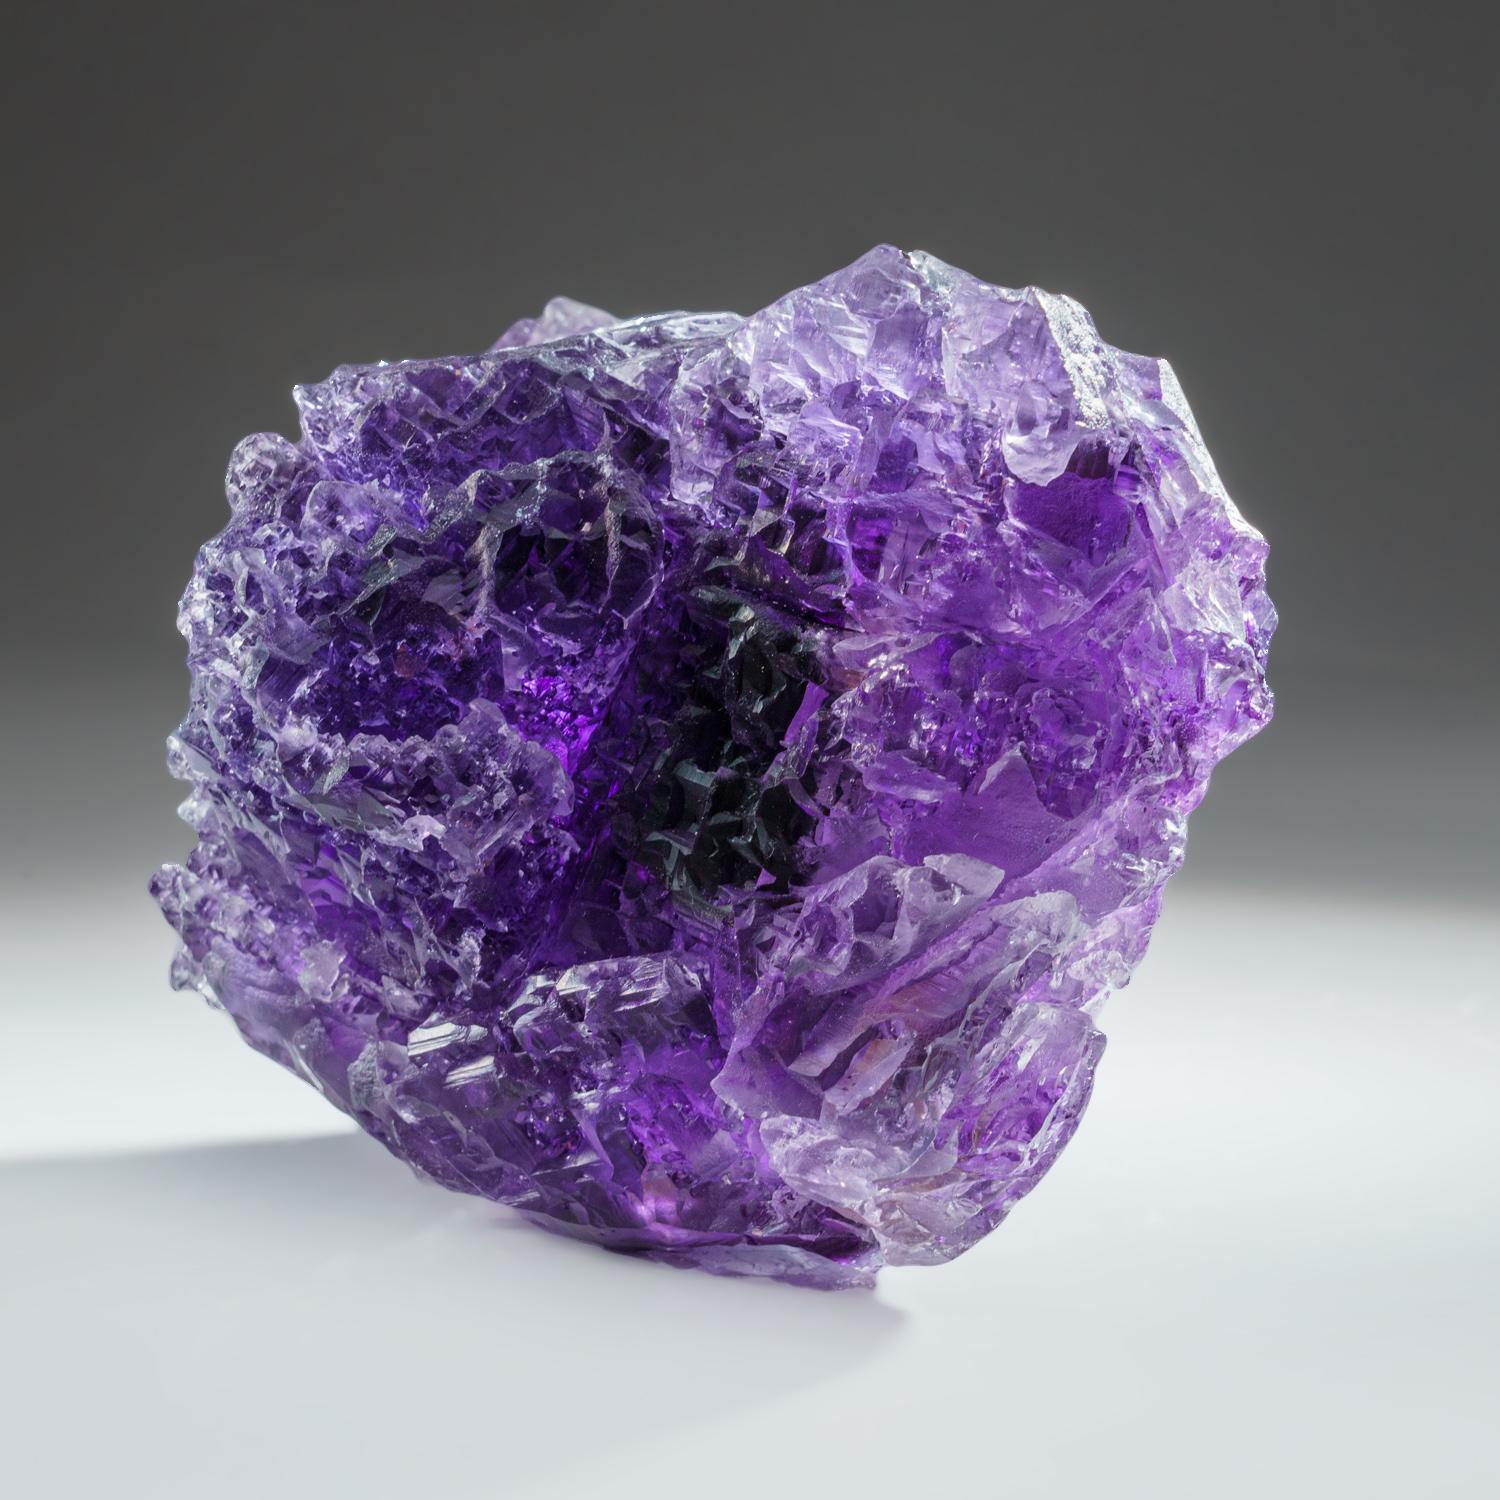 Large double-sided cluster of translucent fluorite crystals. The fluorite is gray color in the core with a thin purple outer layer that is most noticeable in the crystal corners. The cubic crystals have many smaller cubic crystal faces on the